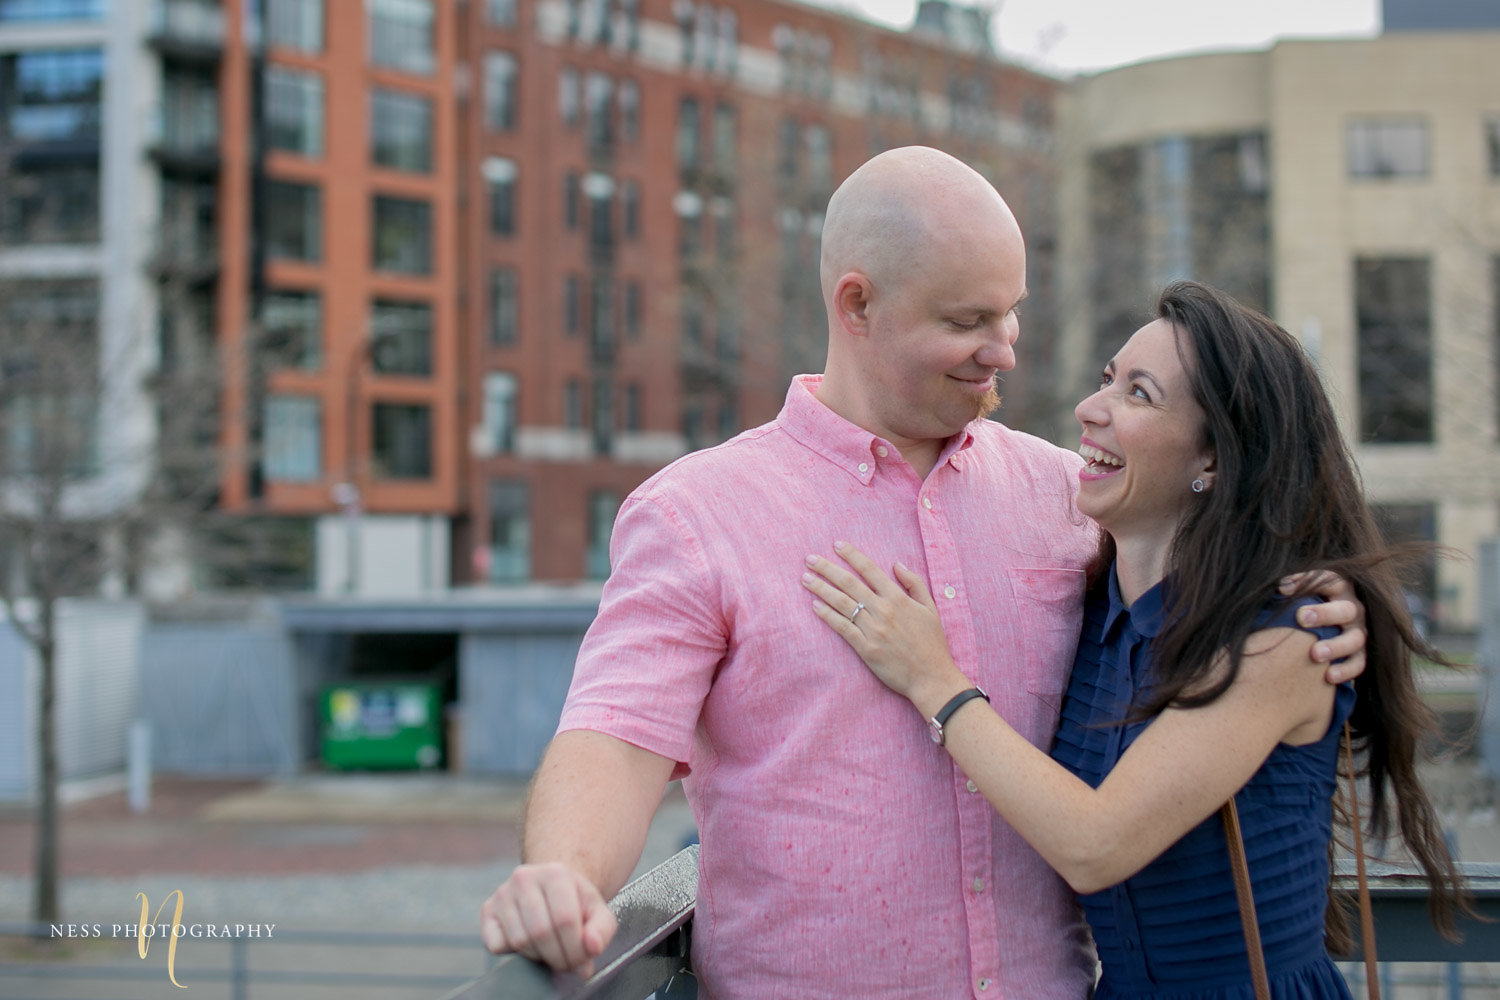 Adelina & Dan Engagement Photos Old Port Montreal with white dog By Ness Photography Wedding and Engagement Photographer 11.jpg